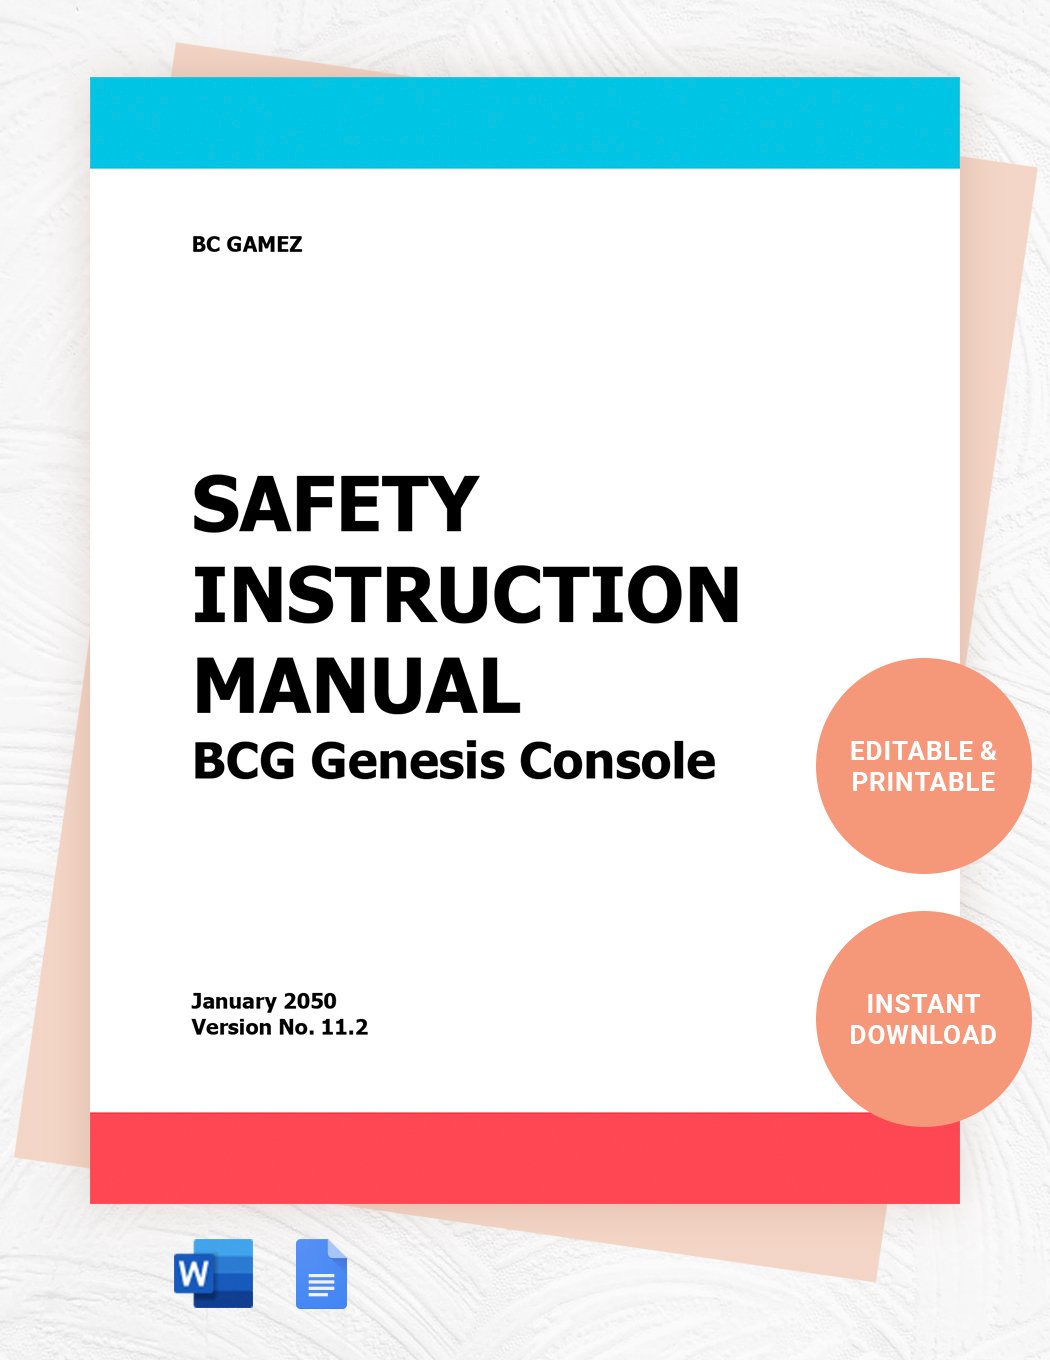 Safety Instruction Manual Template